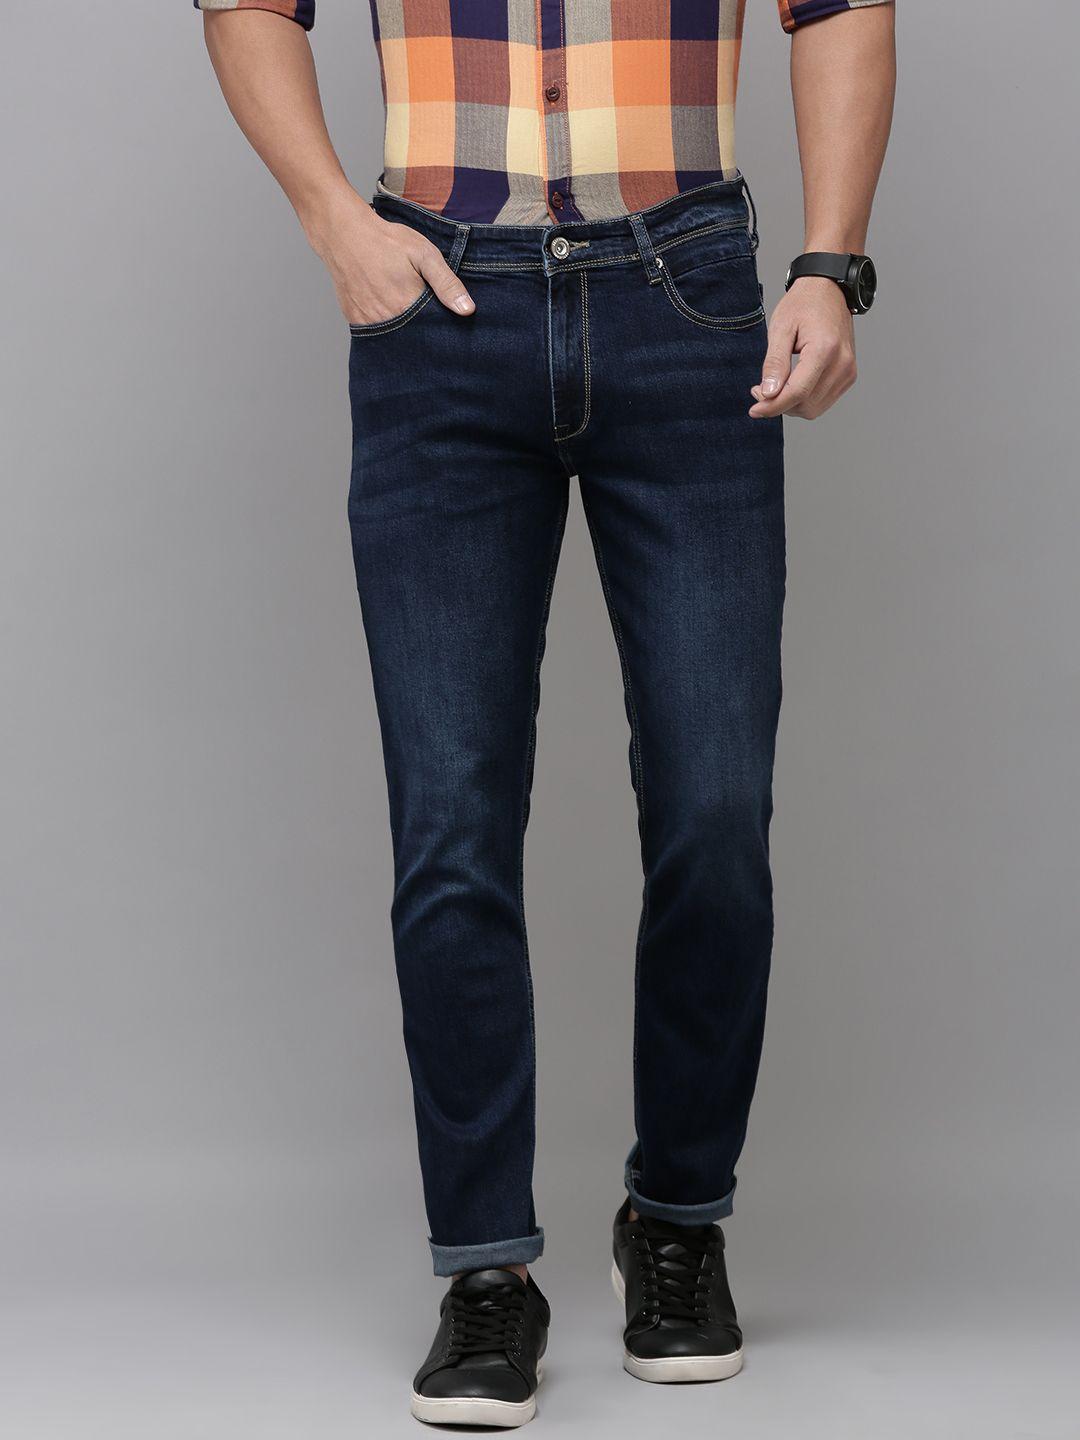 beat london by pepe jeans men light fade stretchable jeans